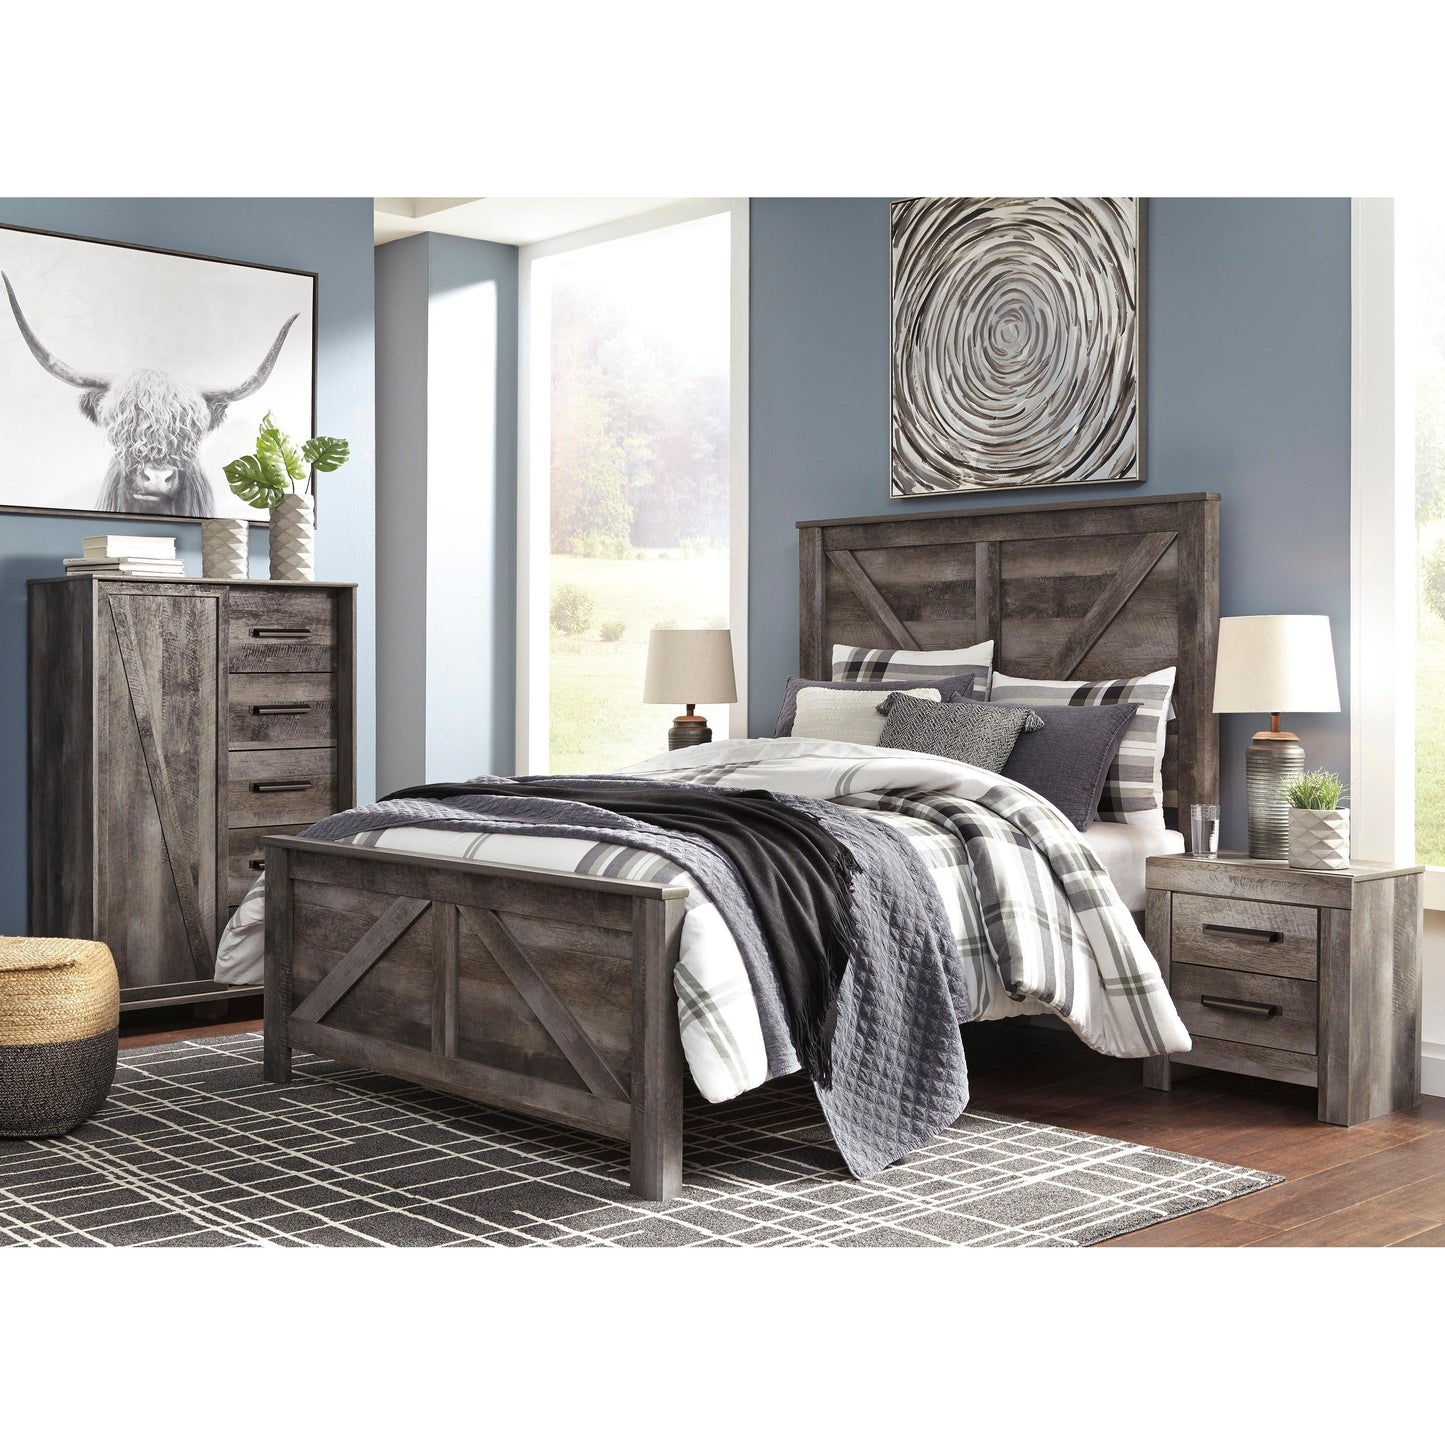 Signature Design by Ashley Wynnlow B440 5 pc Queen Crossbuck Panel Bedroom Set IMAGE 2